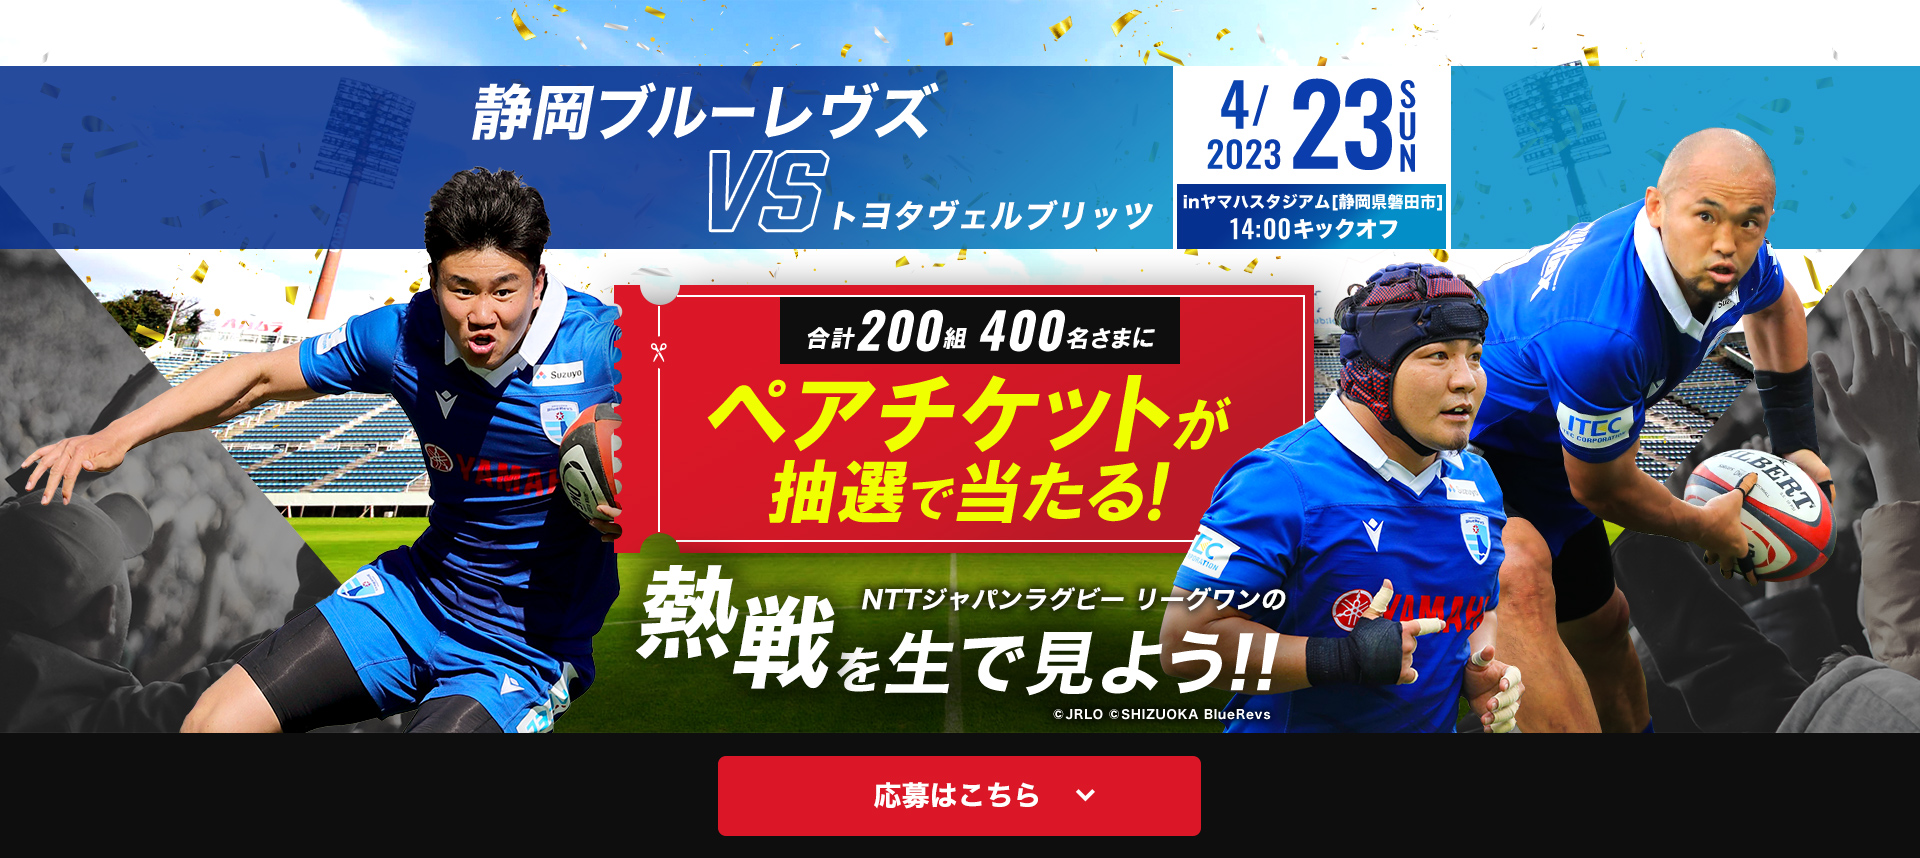 JAPAN RUGBY LEAGUE ONE 2022-23